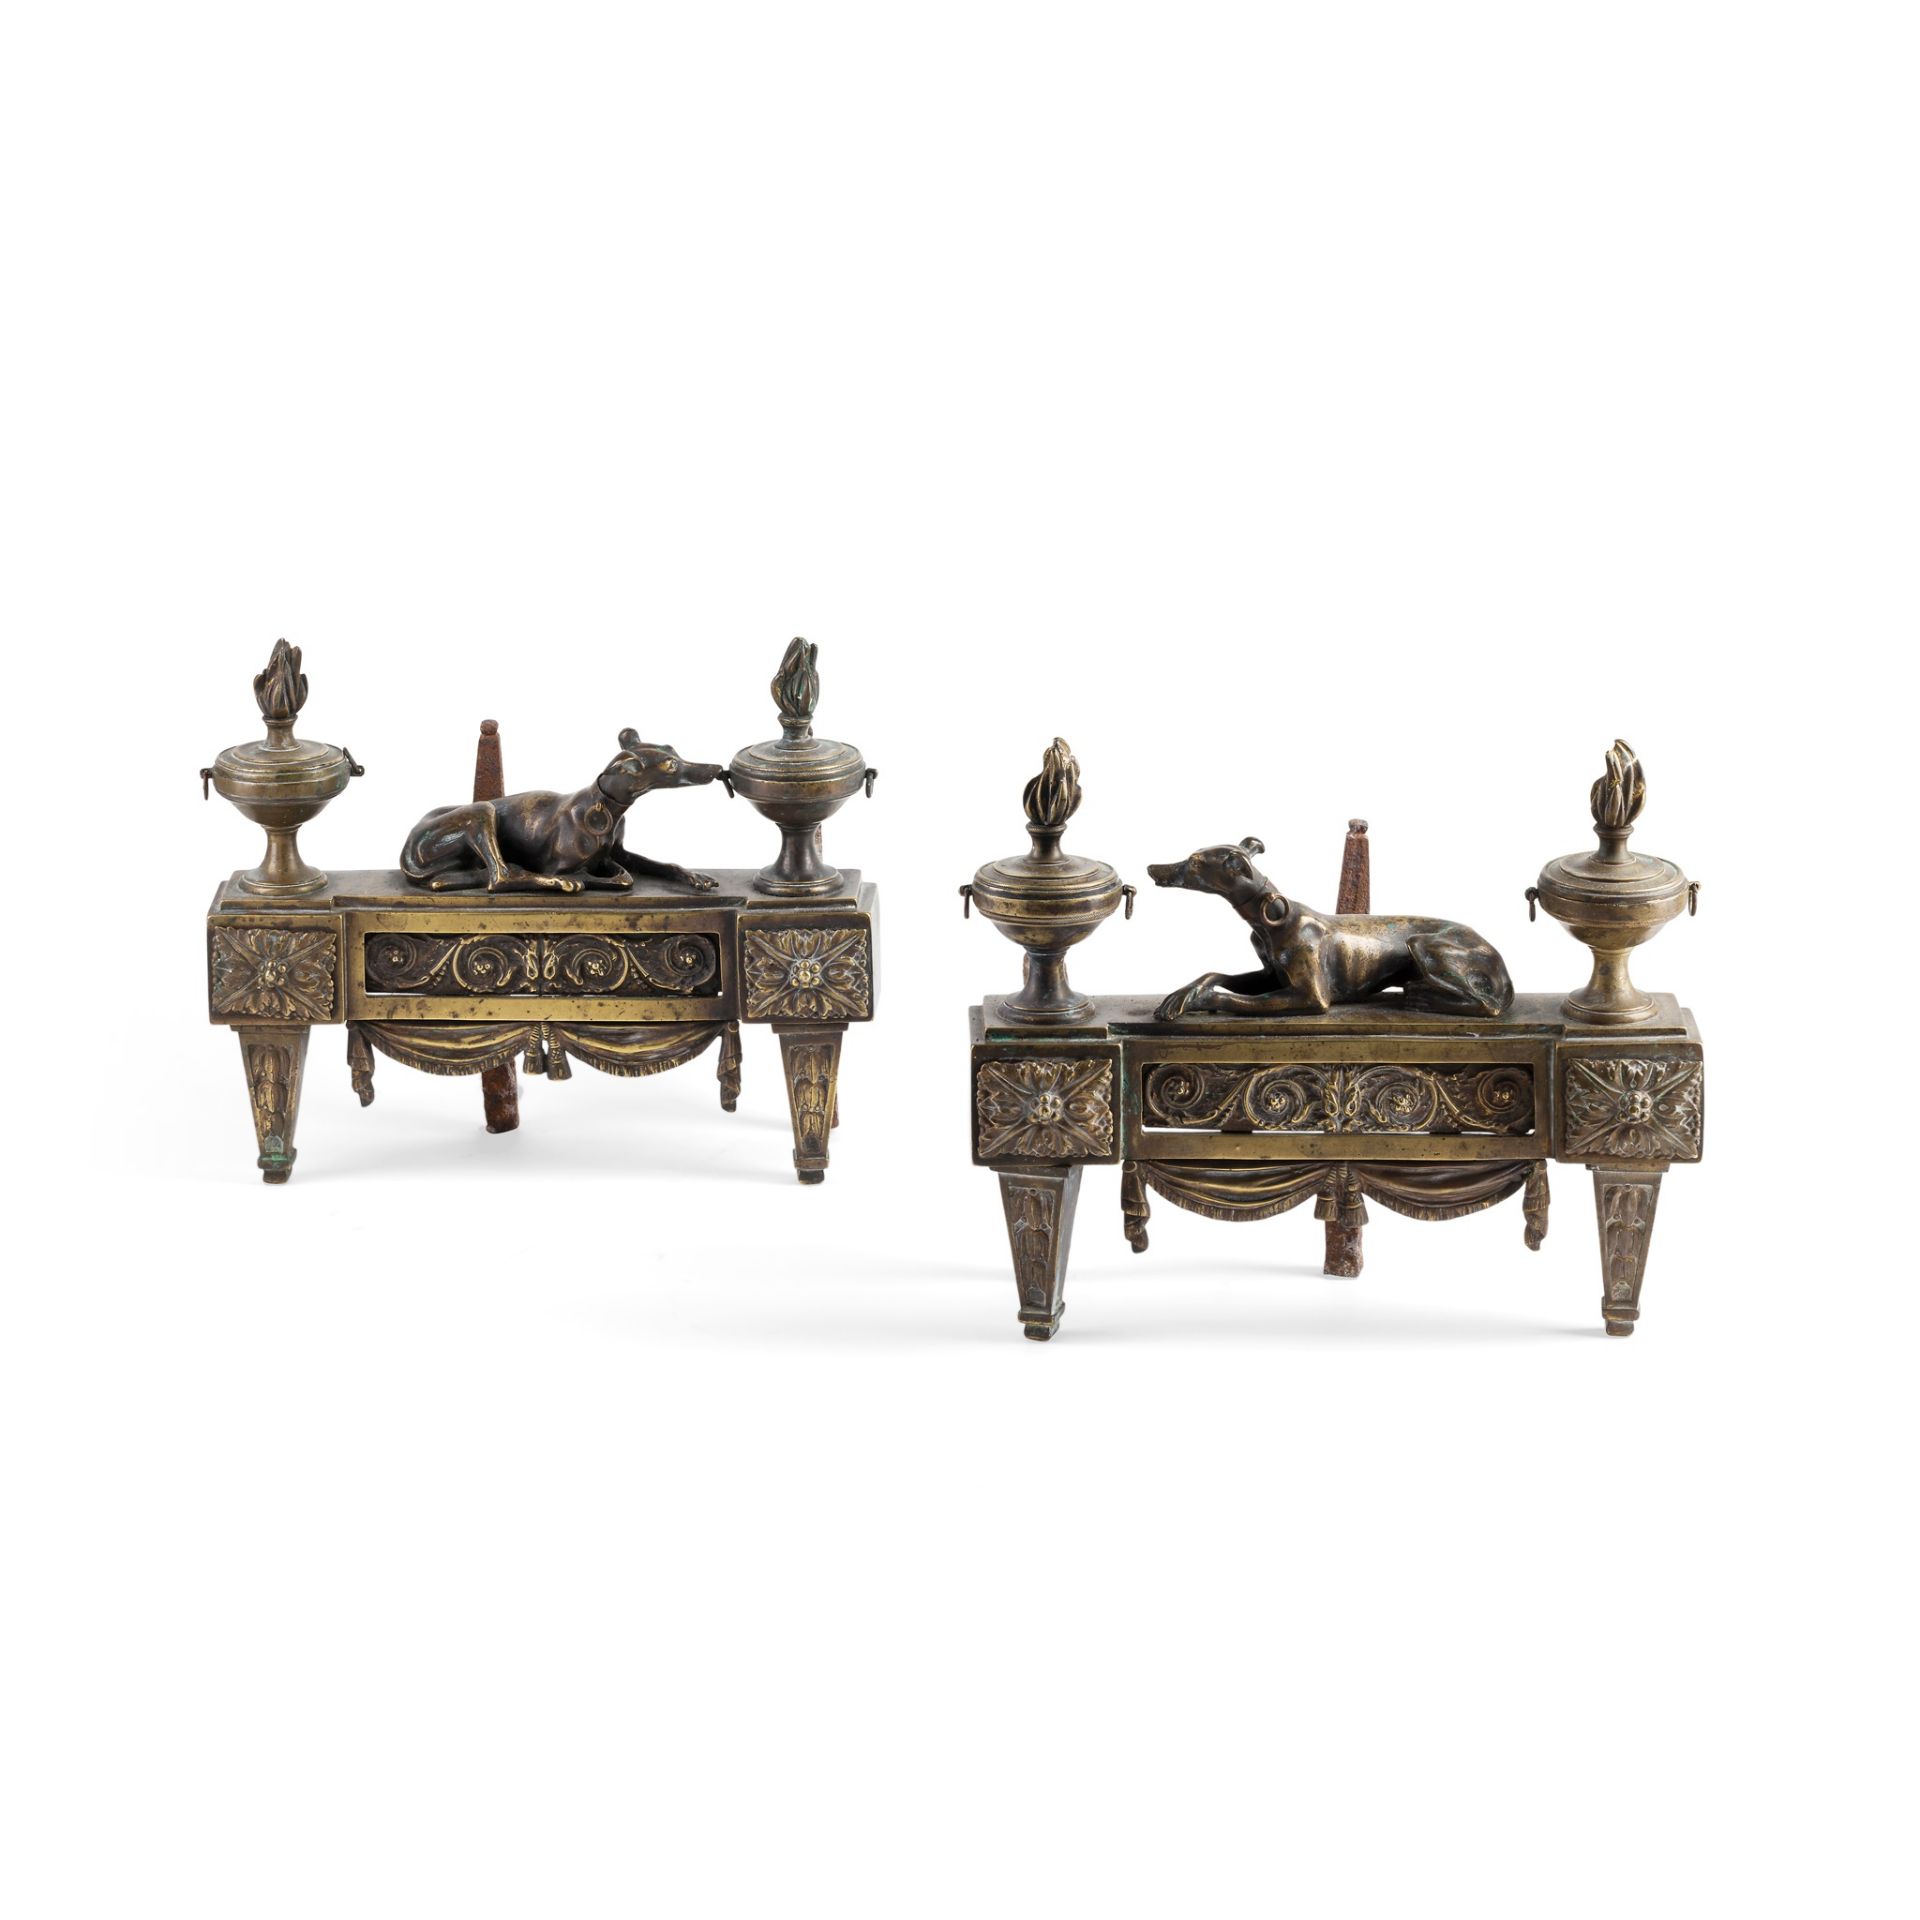 PAIR OF BRONZE FIRE DOGS 19TH CENTURY